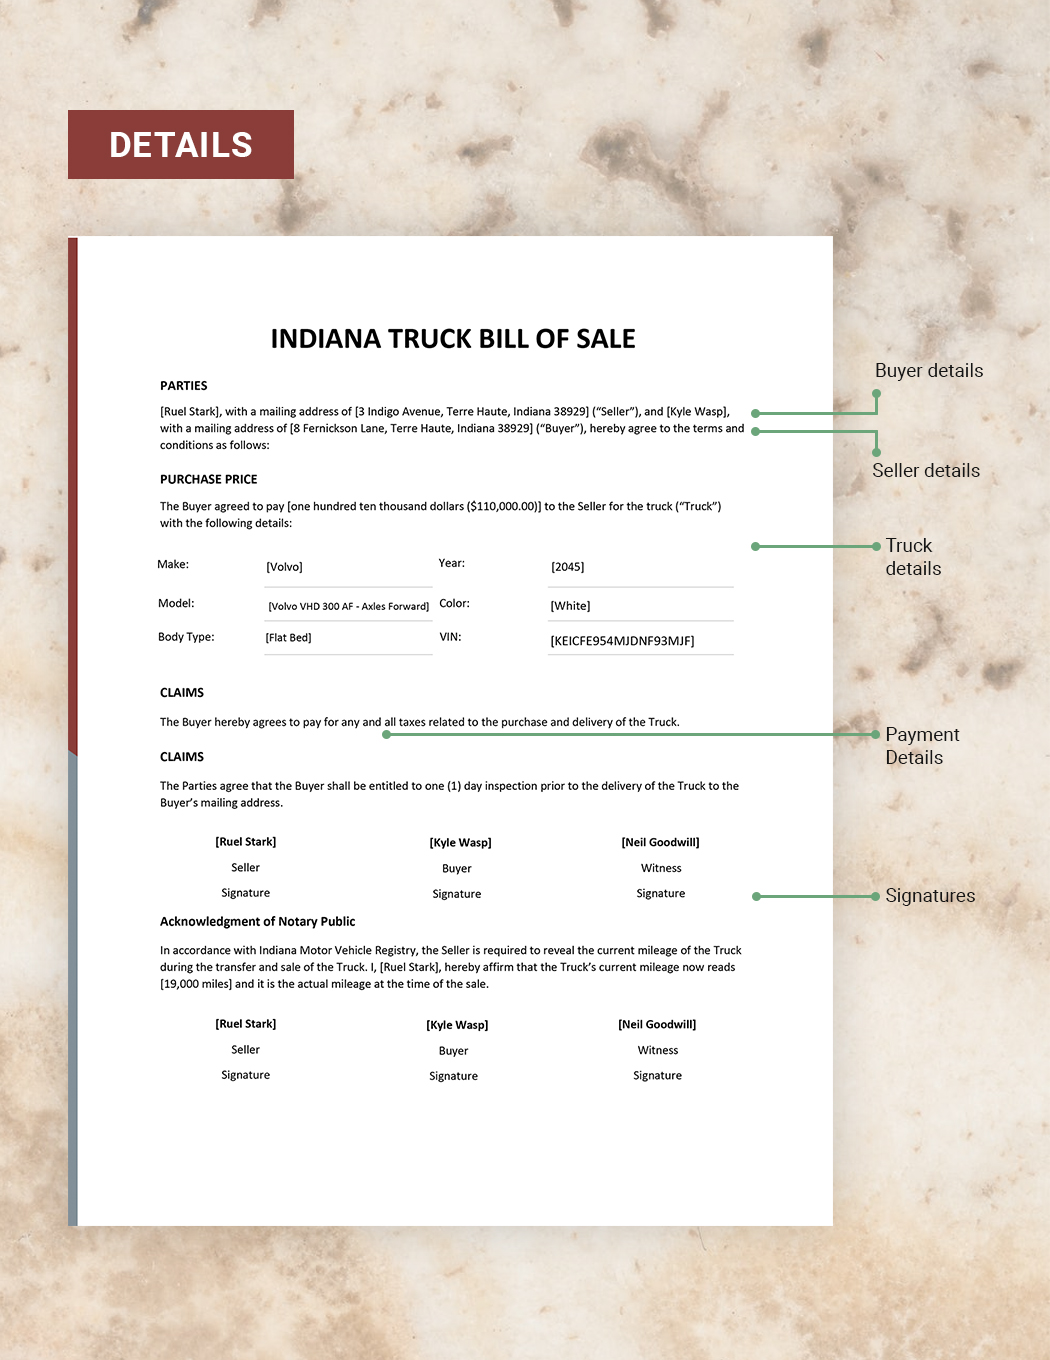 Indiana Truck Bill of Sale Template